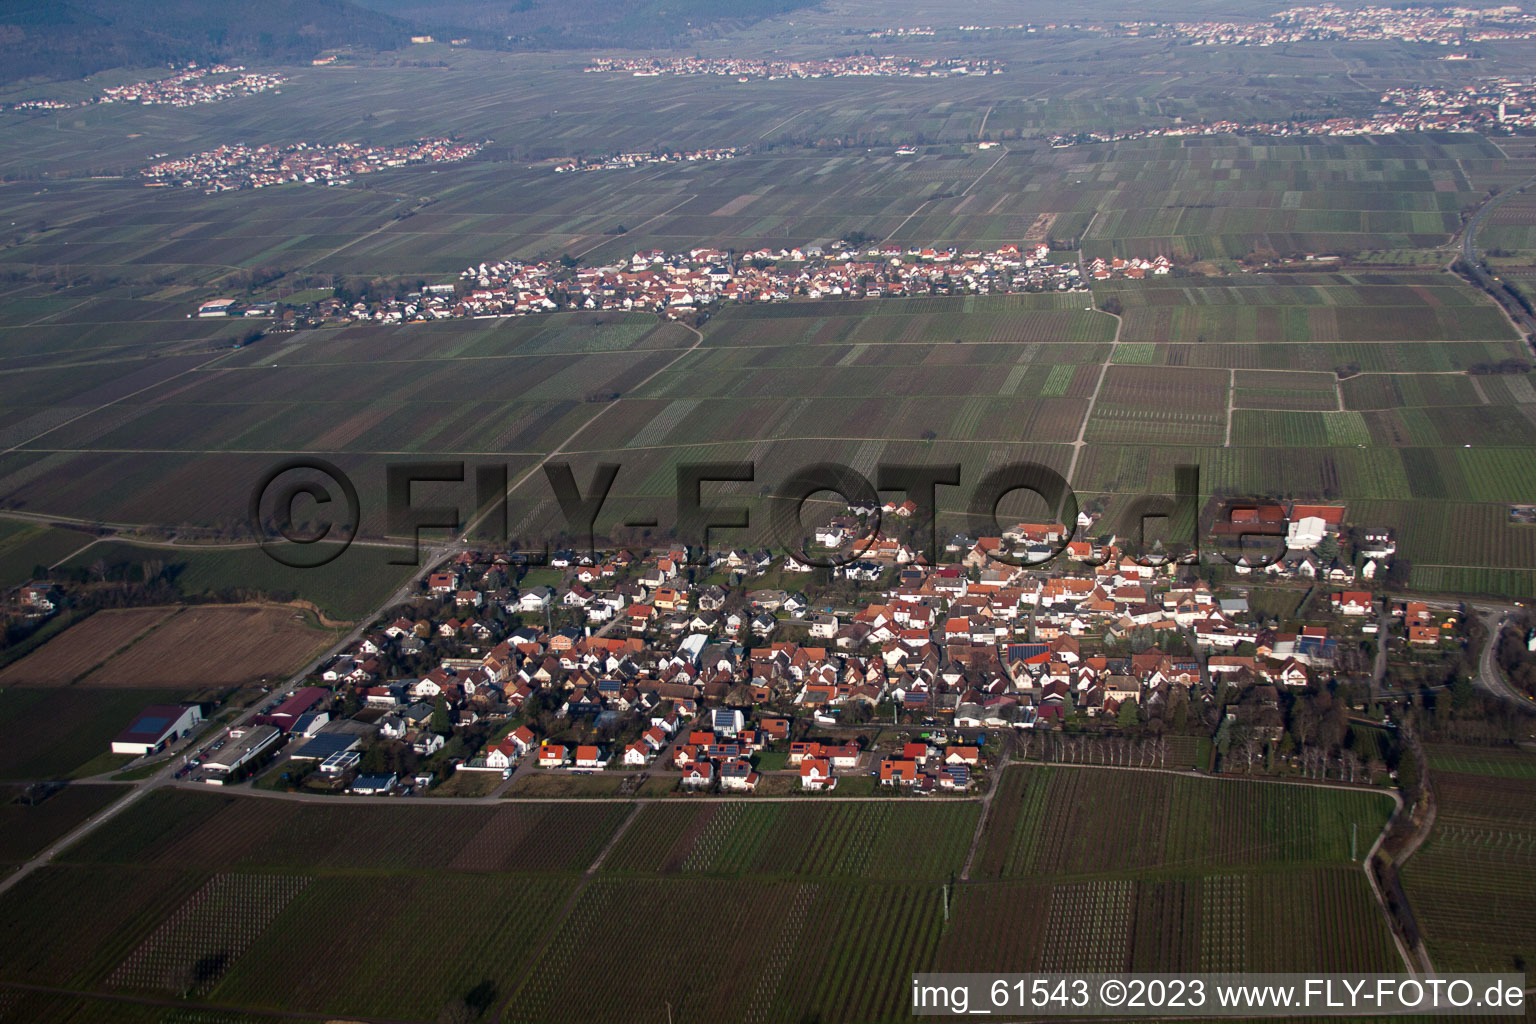 Walsheim in the state Rhineland-Palatinate, Germany seen from above